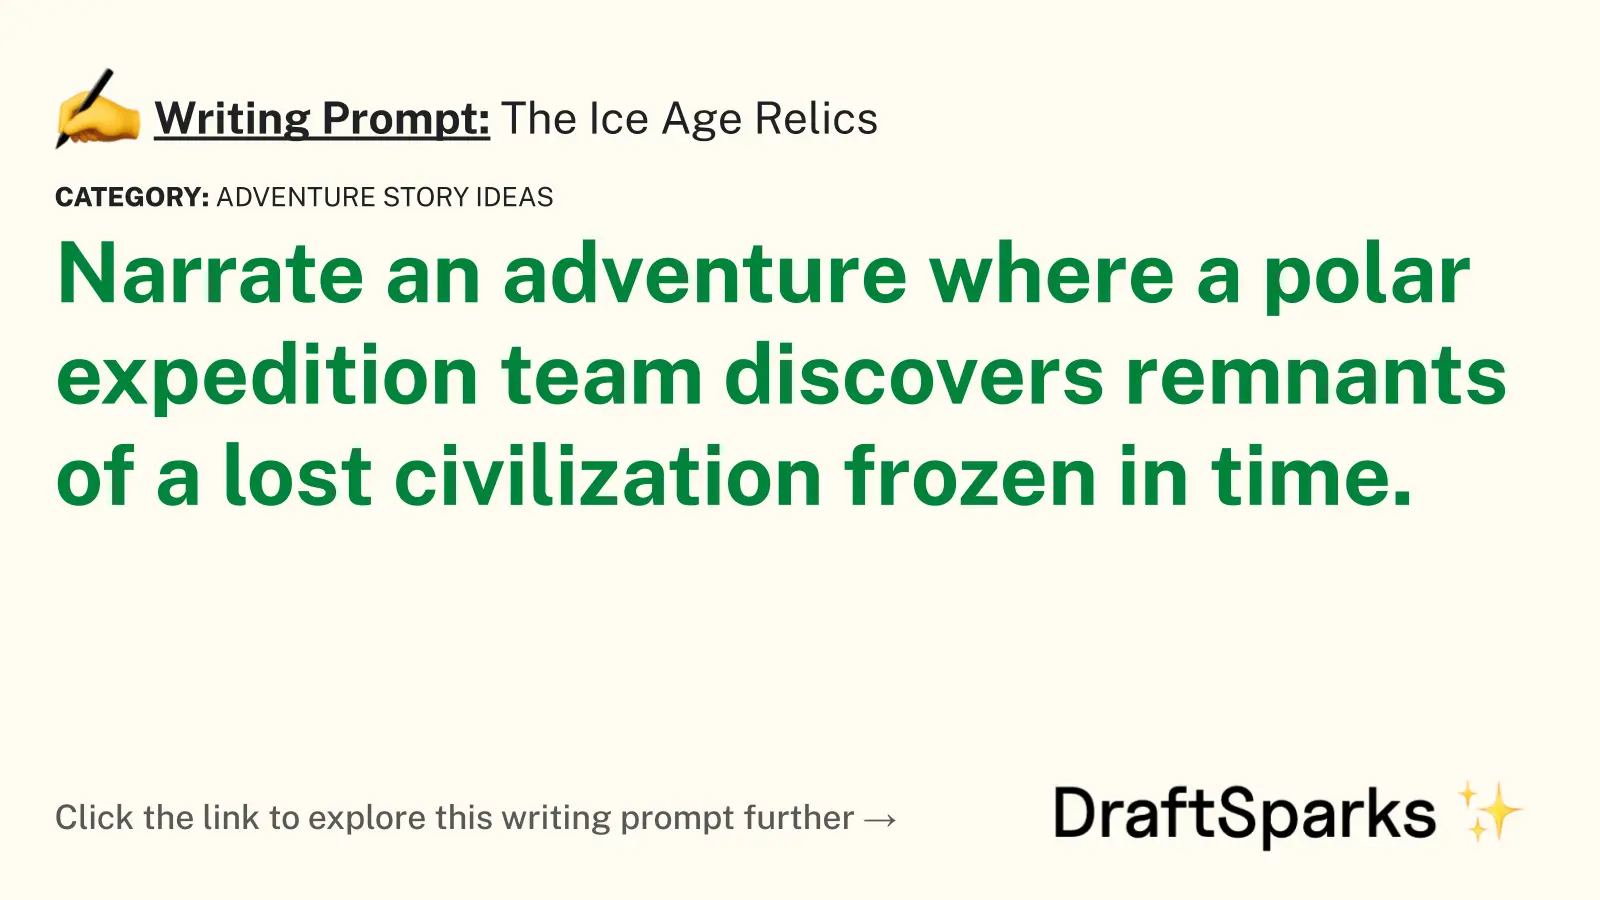 The Ice Age Relics